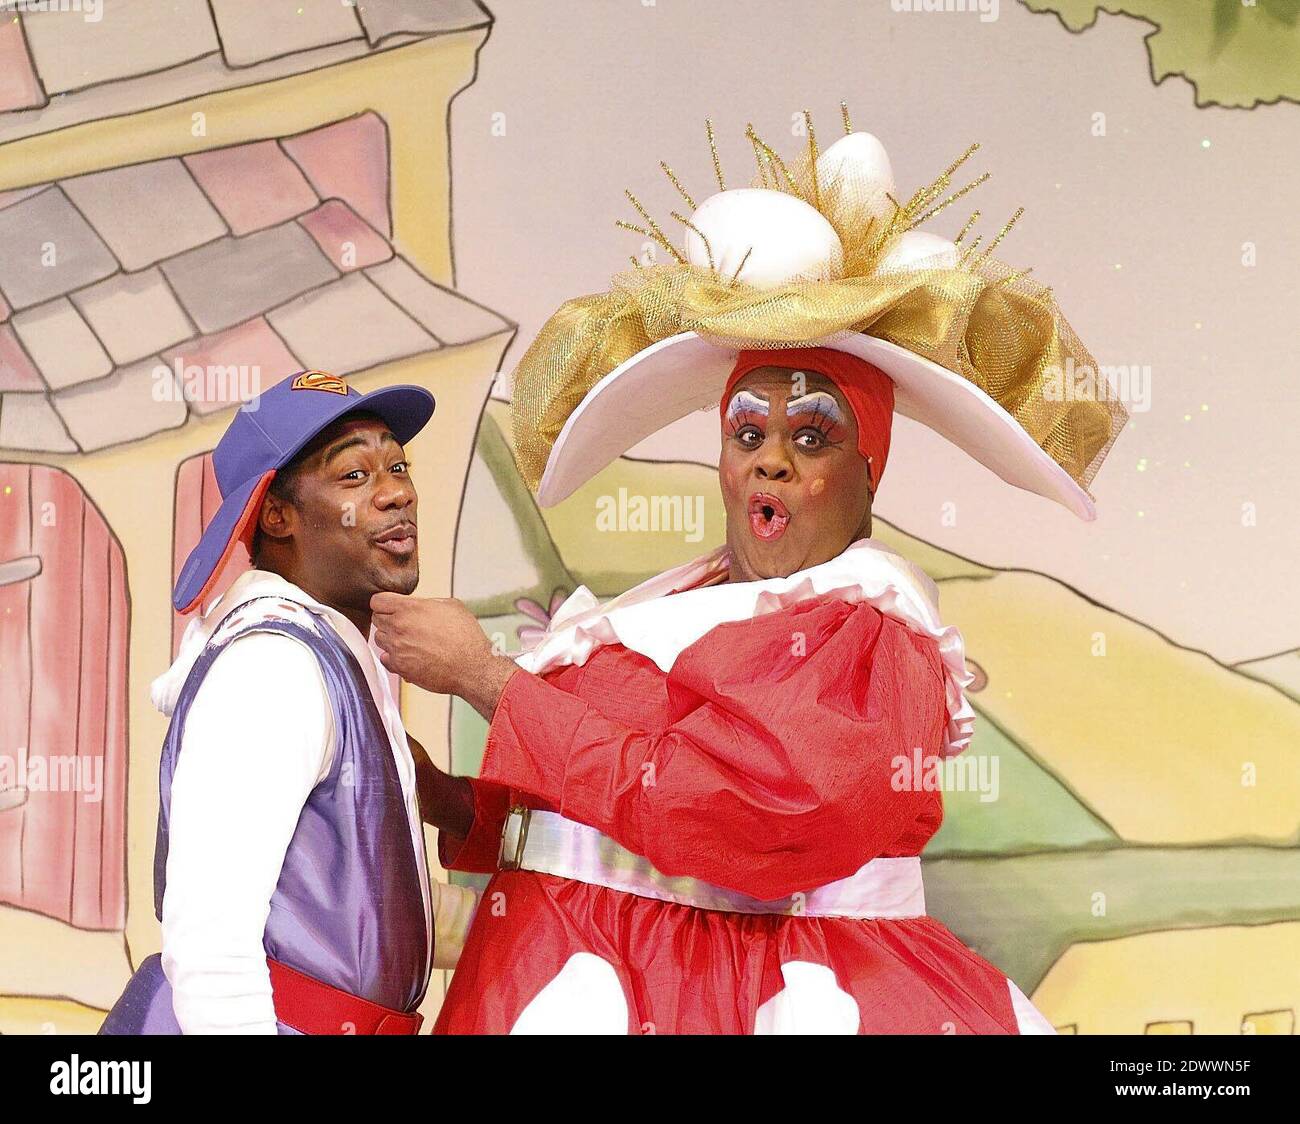 l-r: Kat B (Silly Billy), Clive Rowe (Mother Goose) in MOTHER GOOSE at the Hackney Empire, London E8  04/12/2008  written & directed by Susie McKenna  design: Lotte Collett Stock Photo